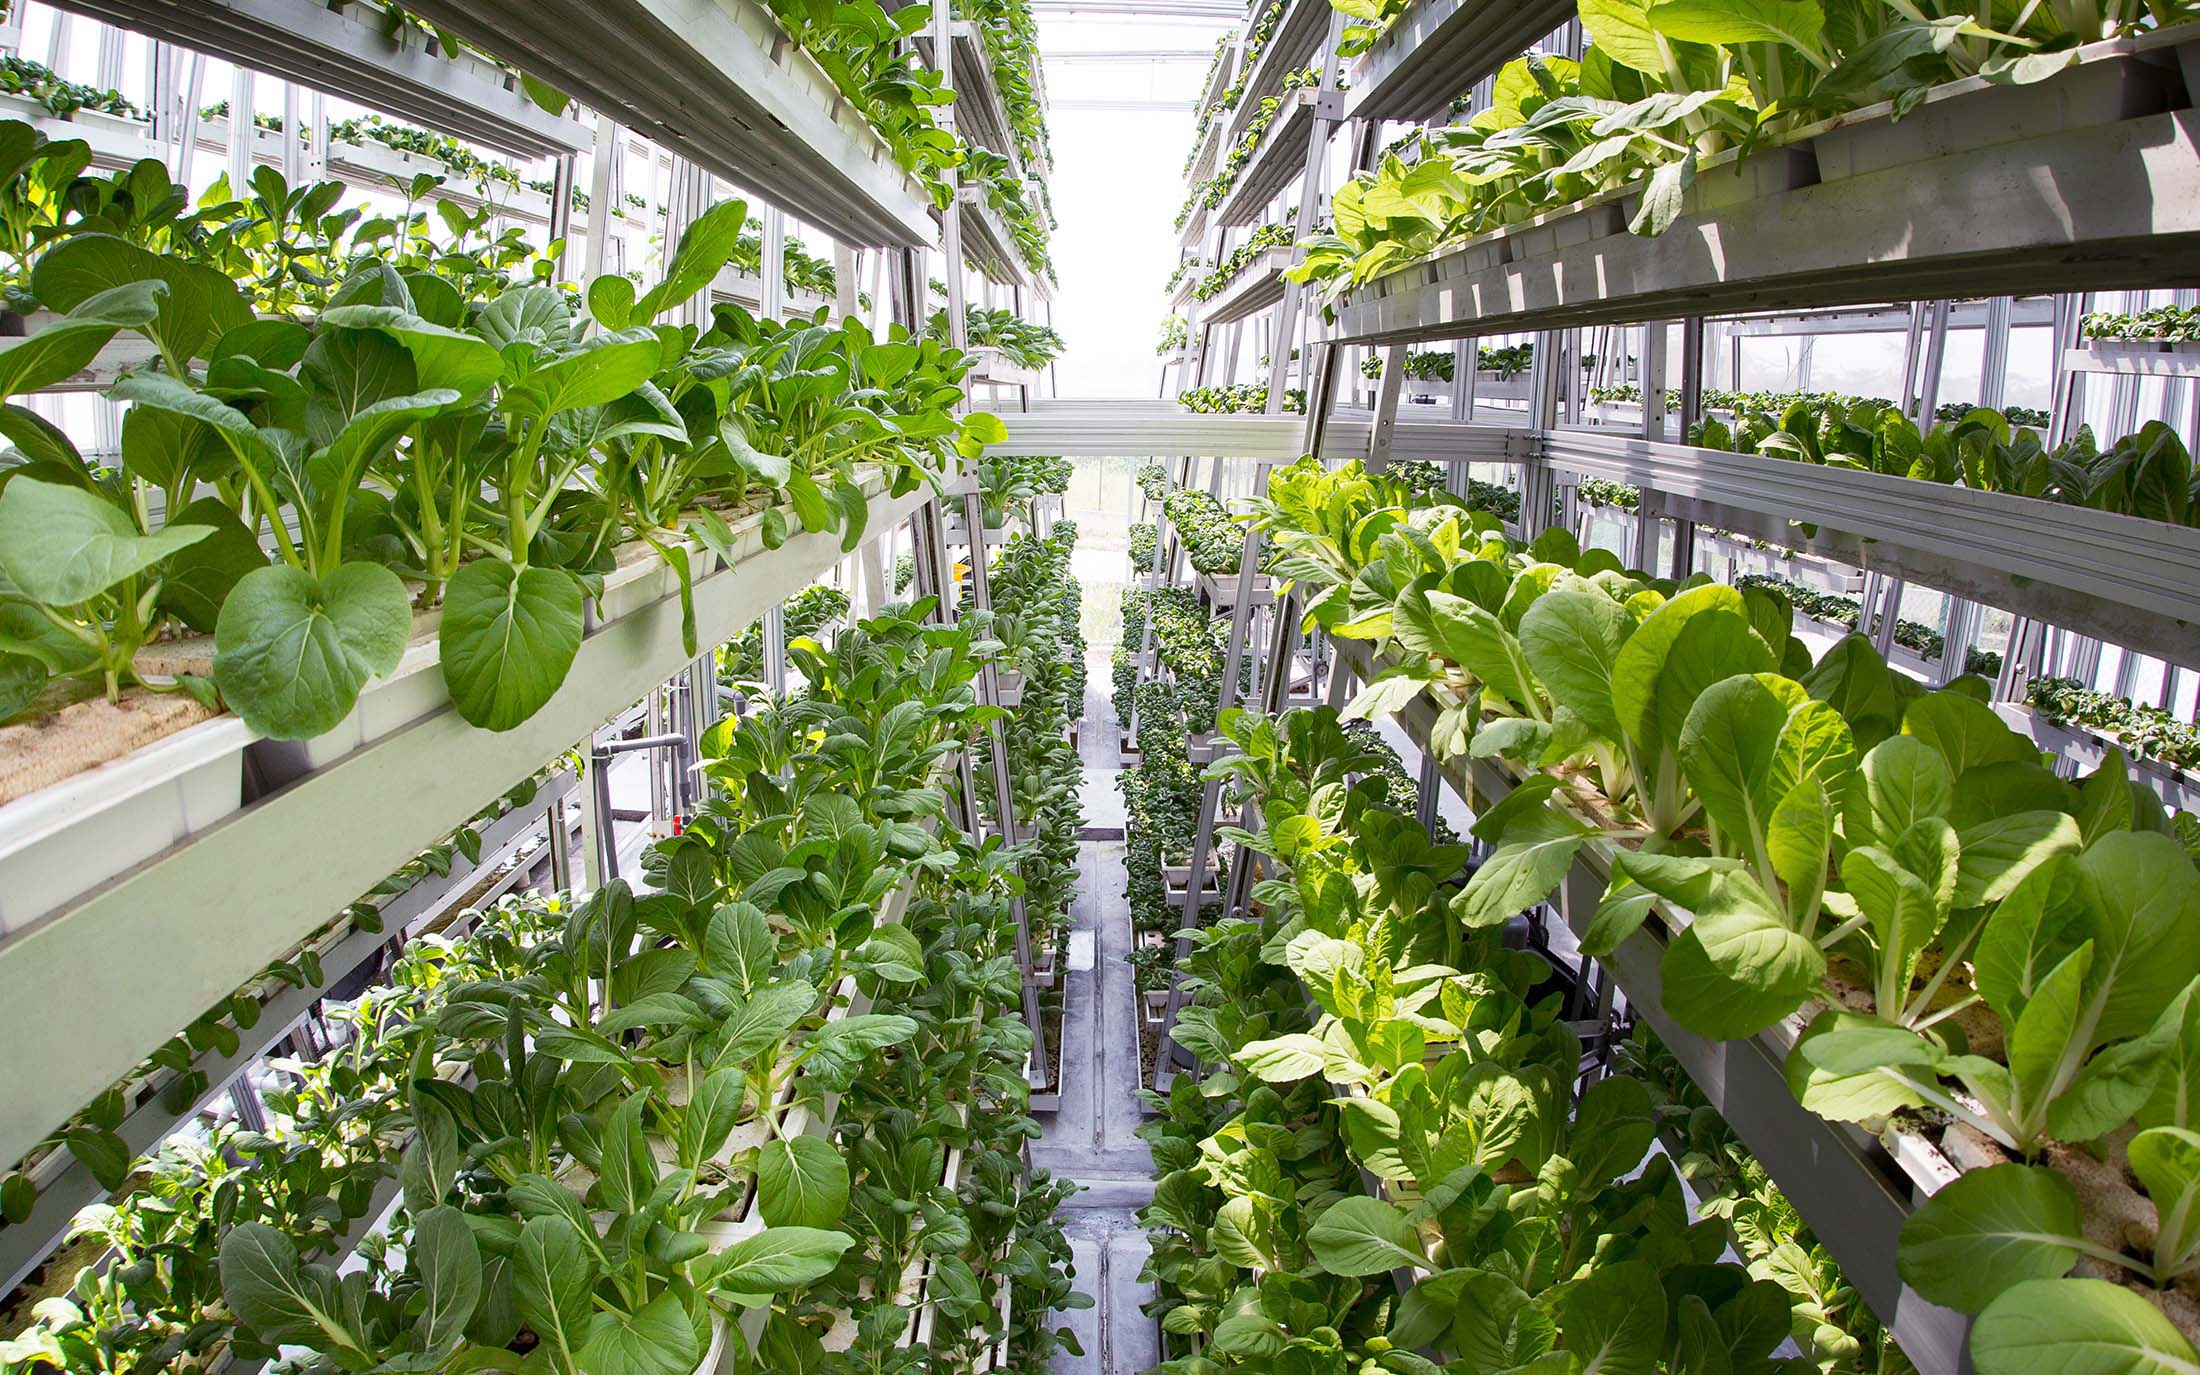 A vertical farm at Sky Greens where leafy vegetables are grown